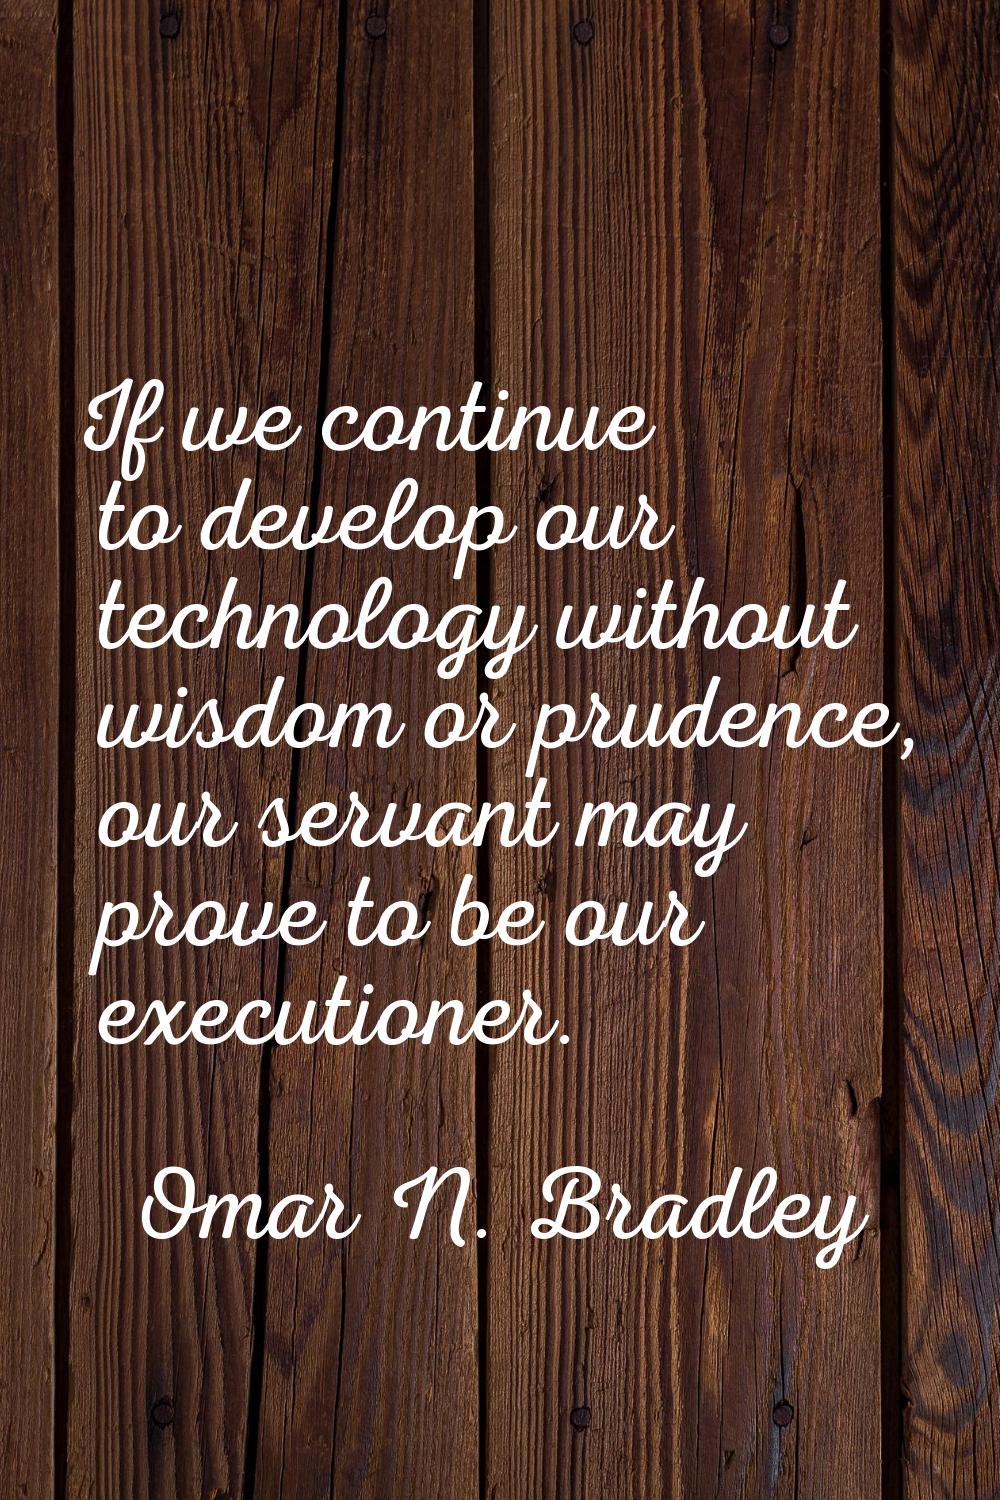 If we continue to develop our technology without wisdom or prudence, our servant may prove to be ou